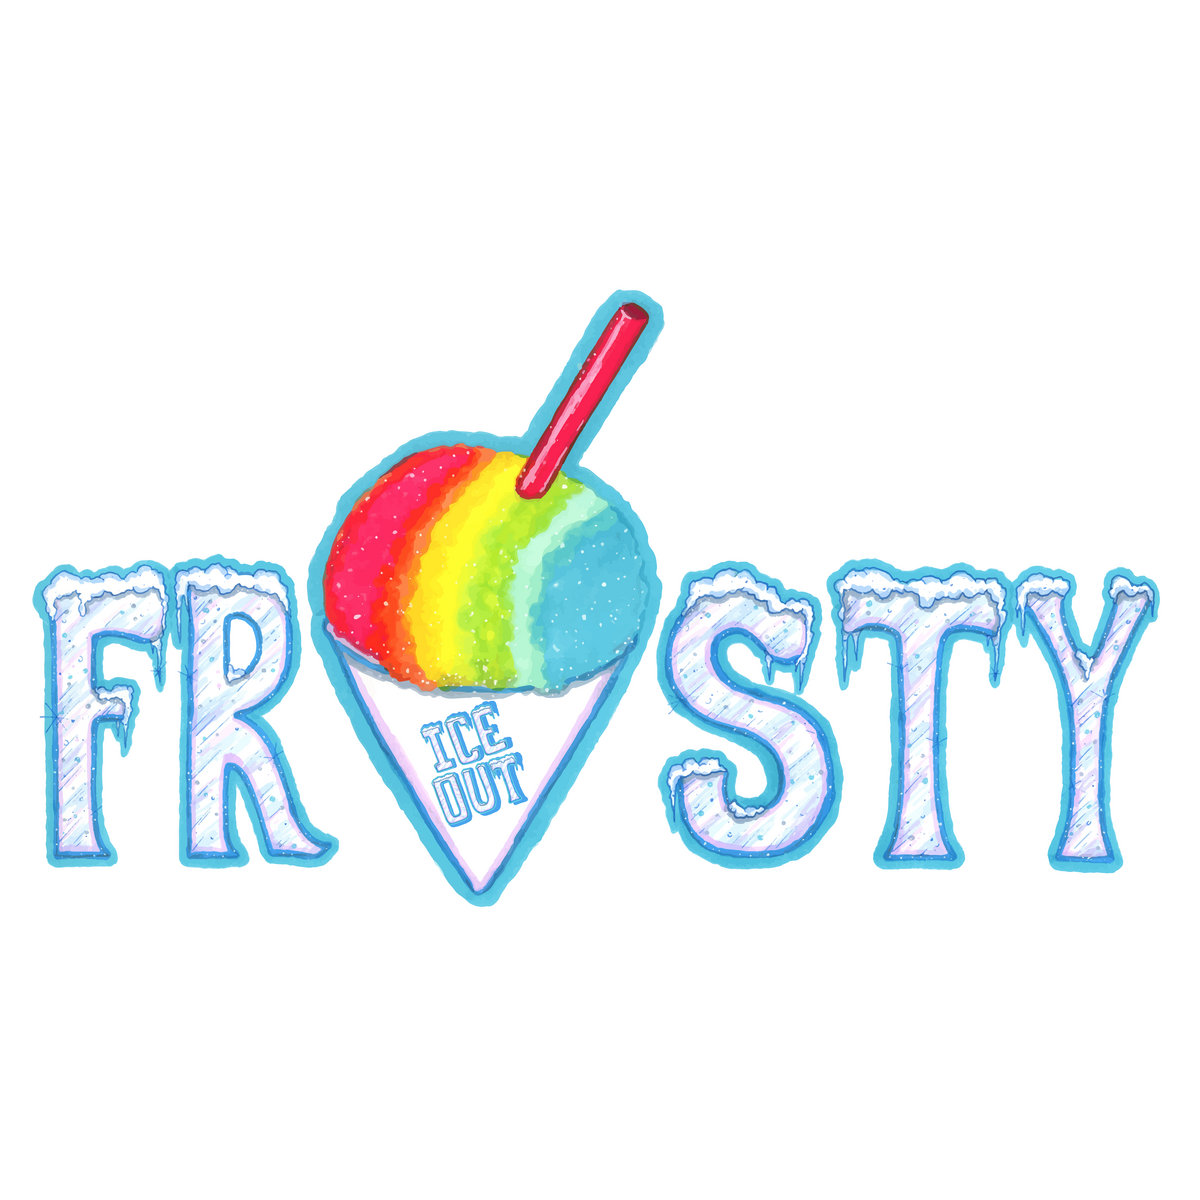 Frosty Album Cover